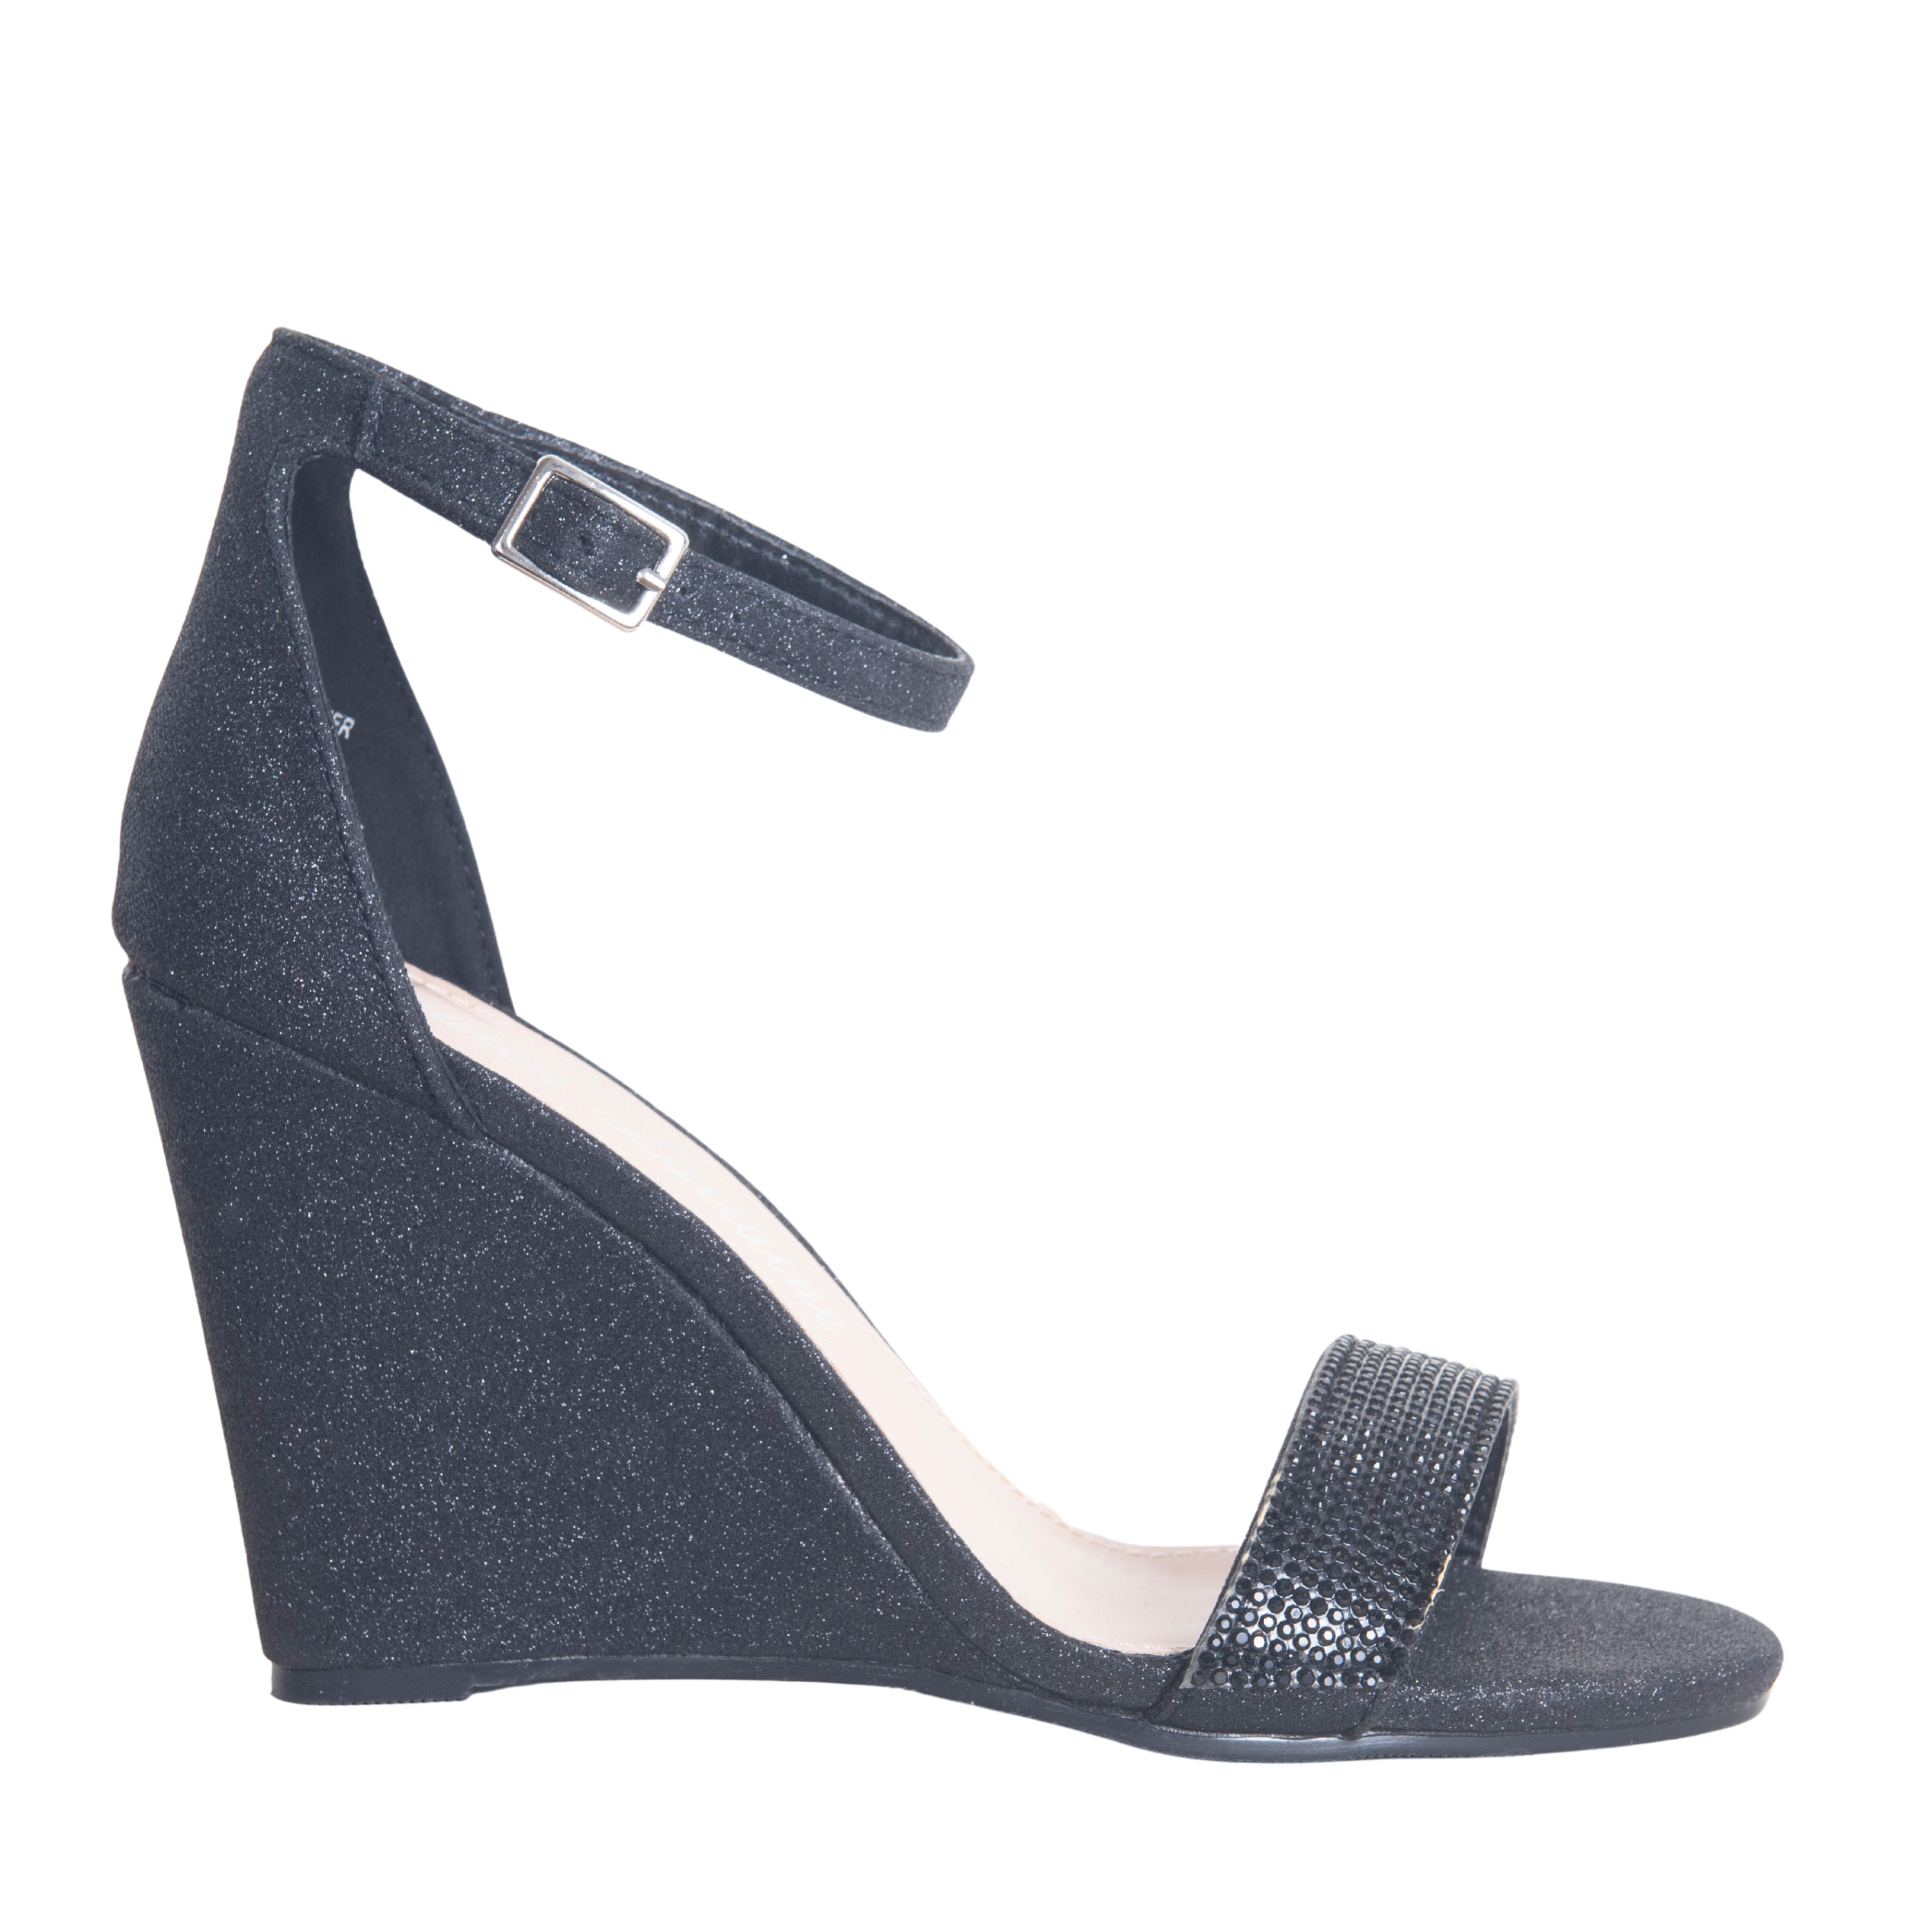 SHIMMER BLACK AND SILVER WEDGE SANDAL WITH RHINESTONE DETAILING